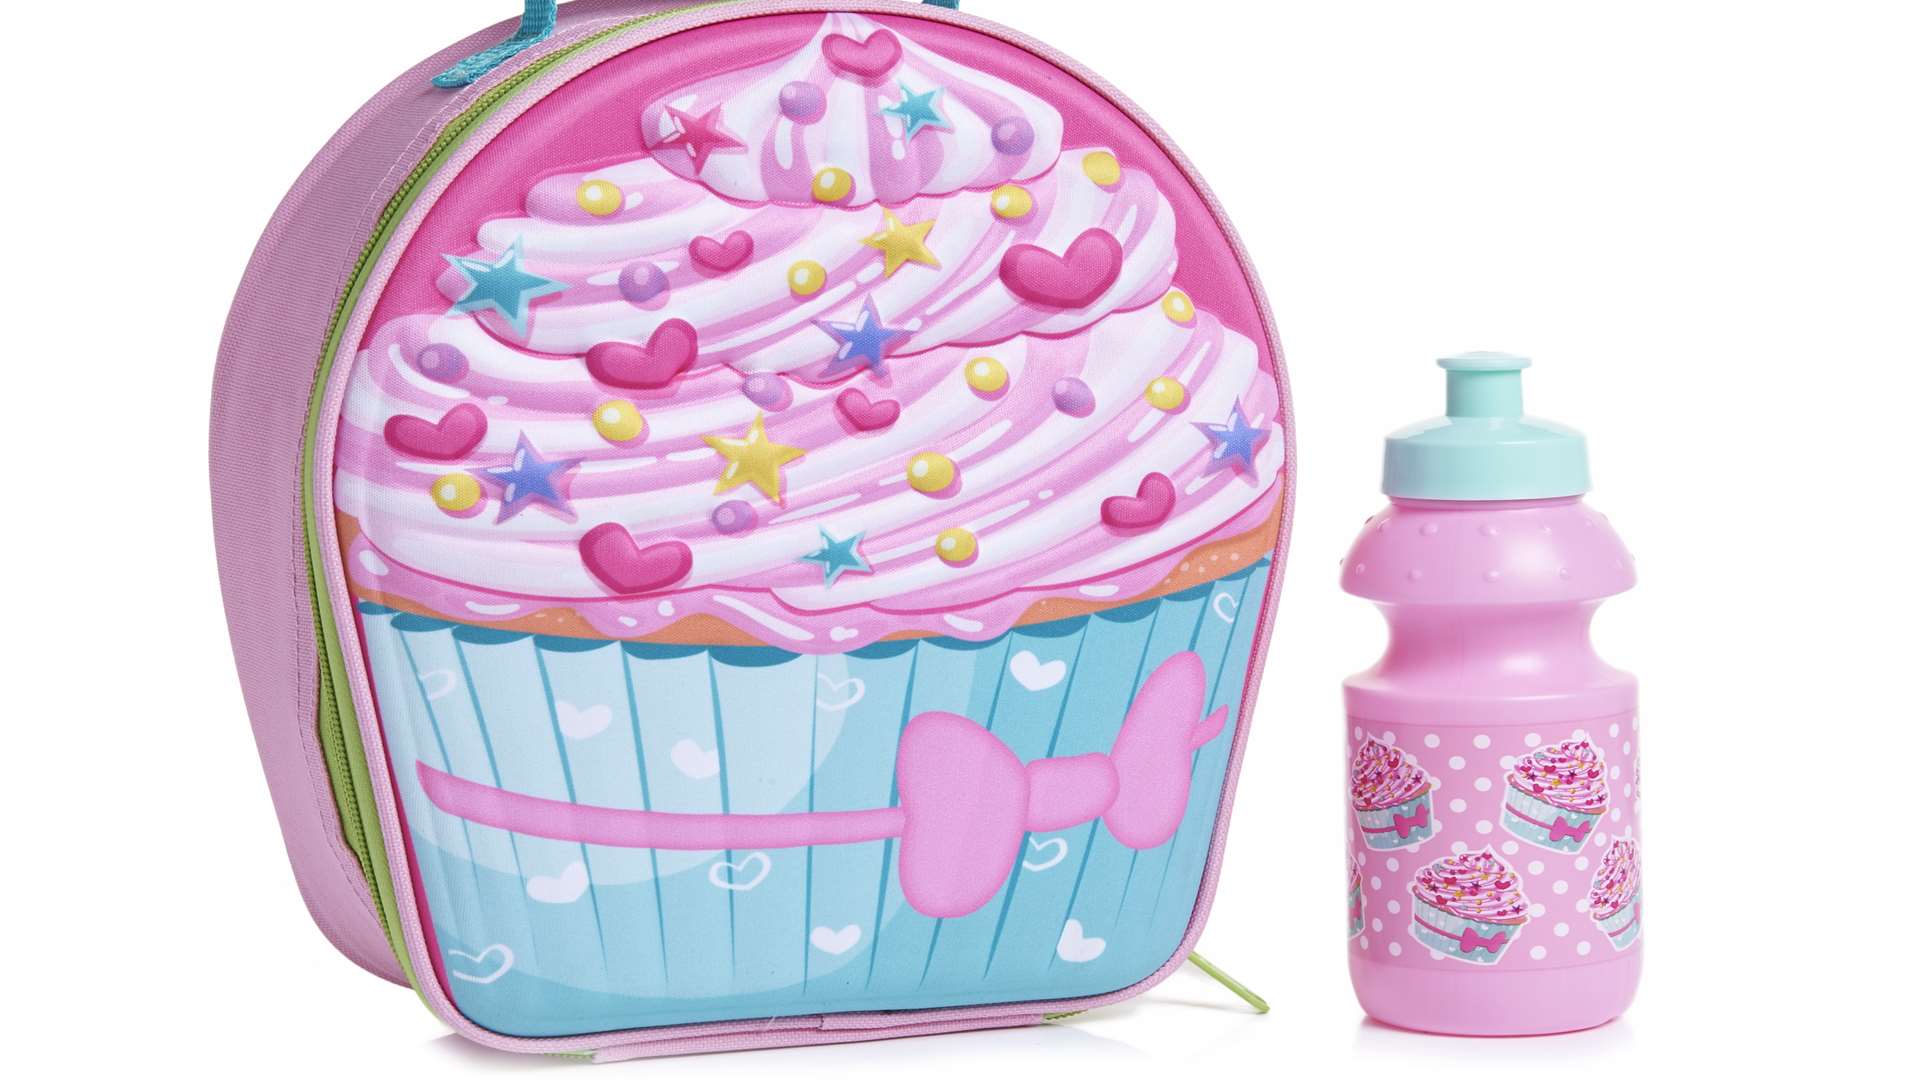 Keep your cakes contained in this range from Wilko